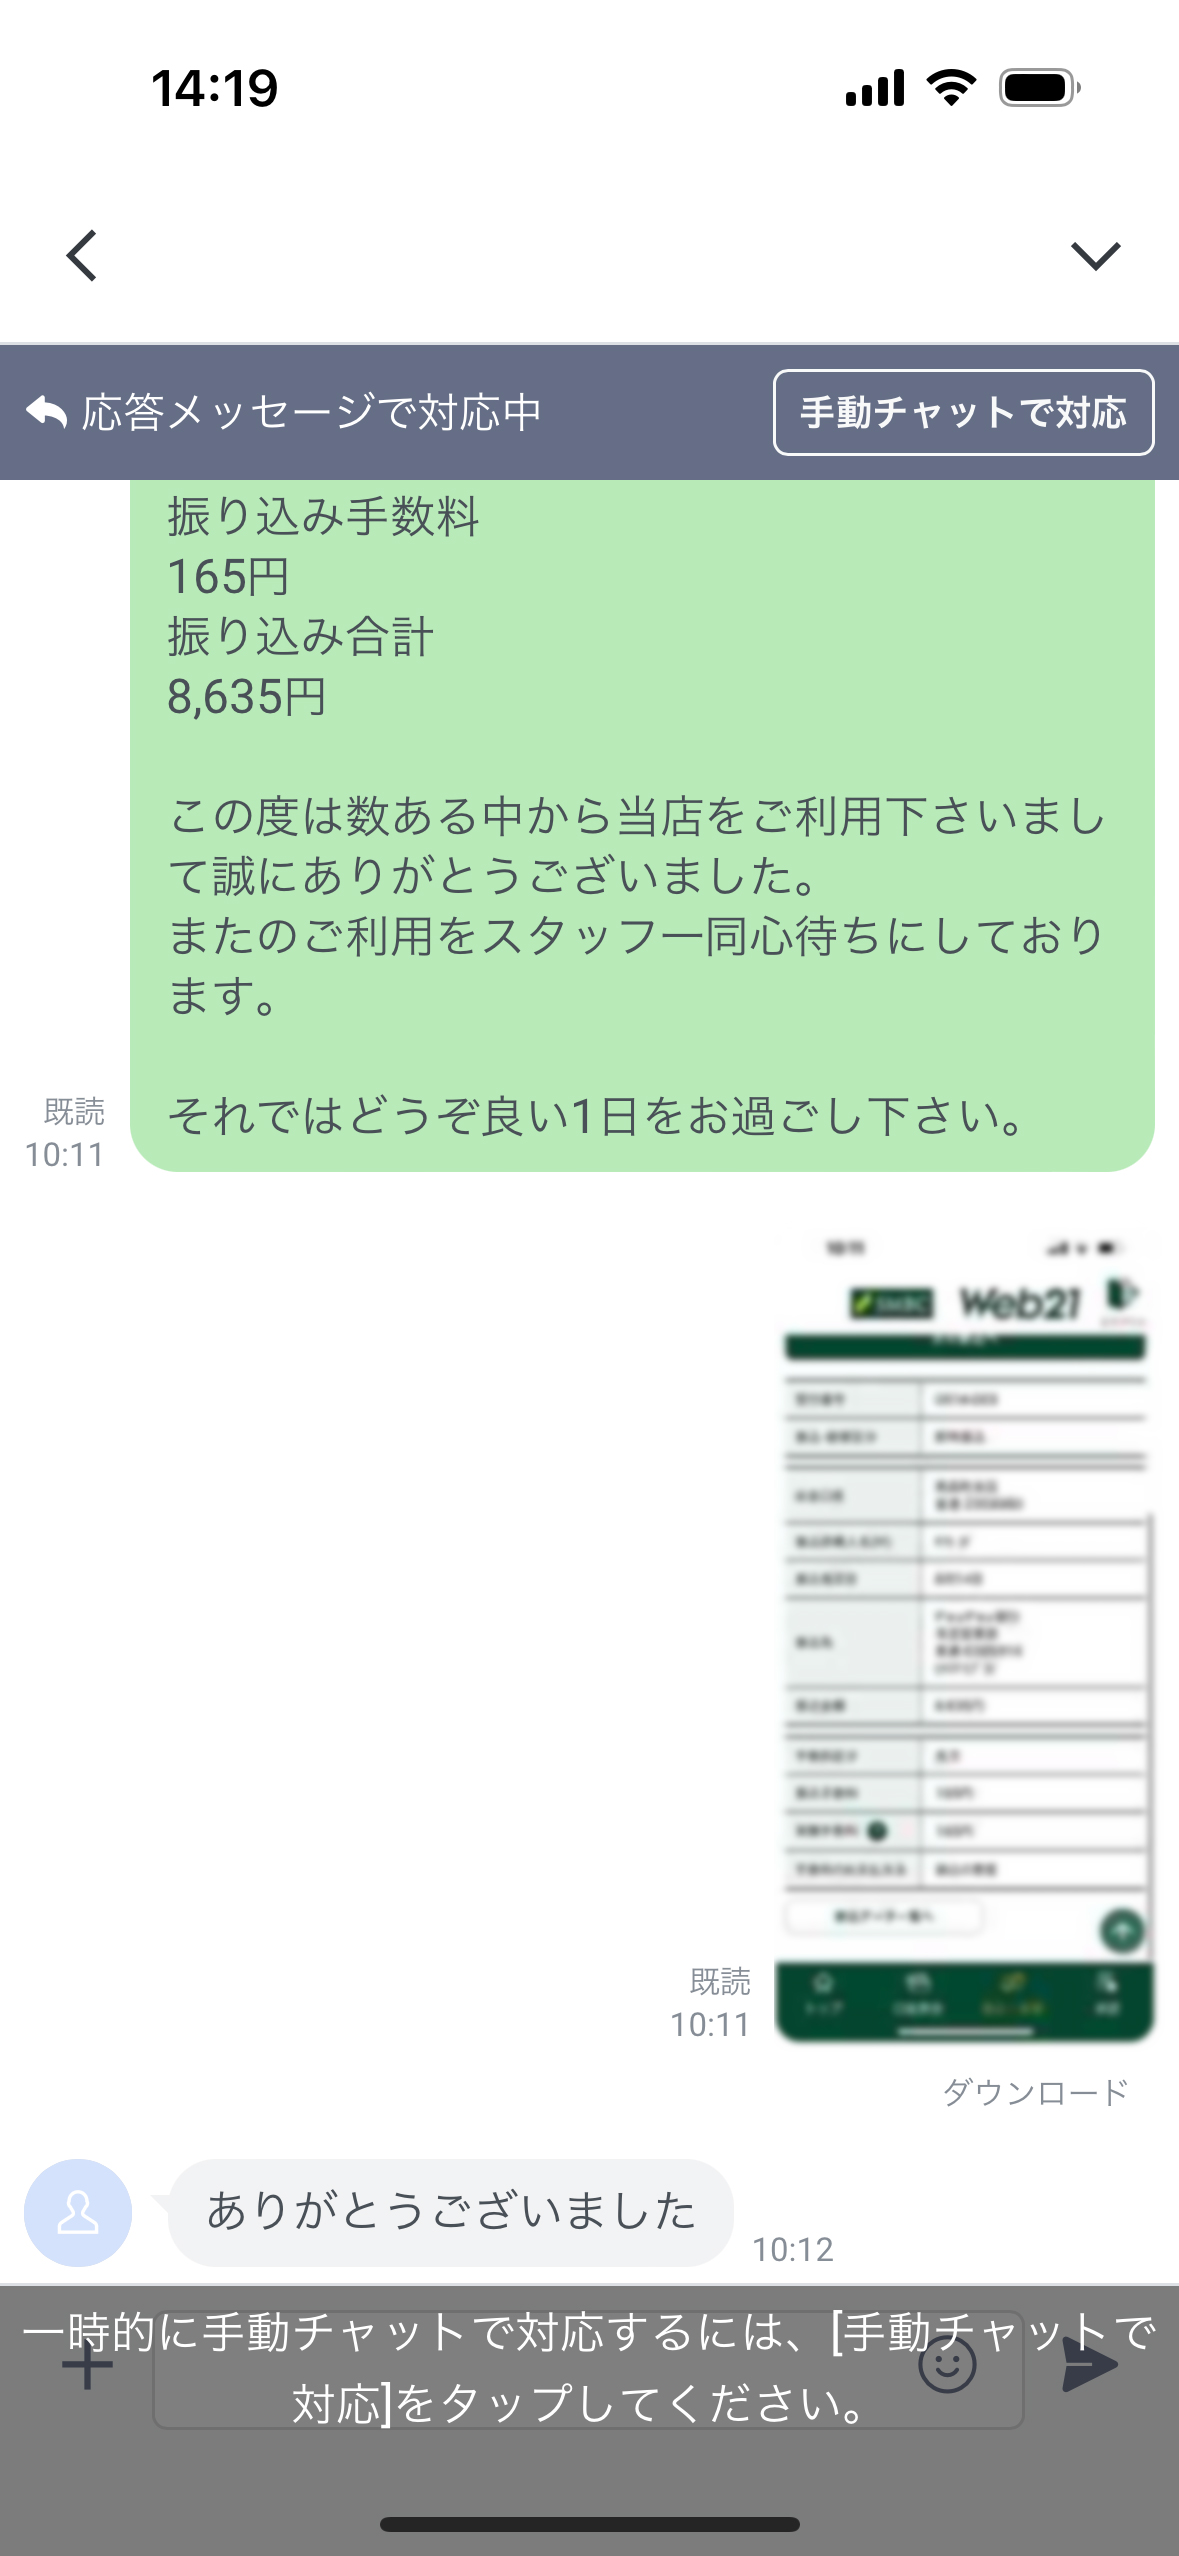 PayPayマネーライト買取